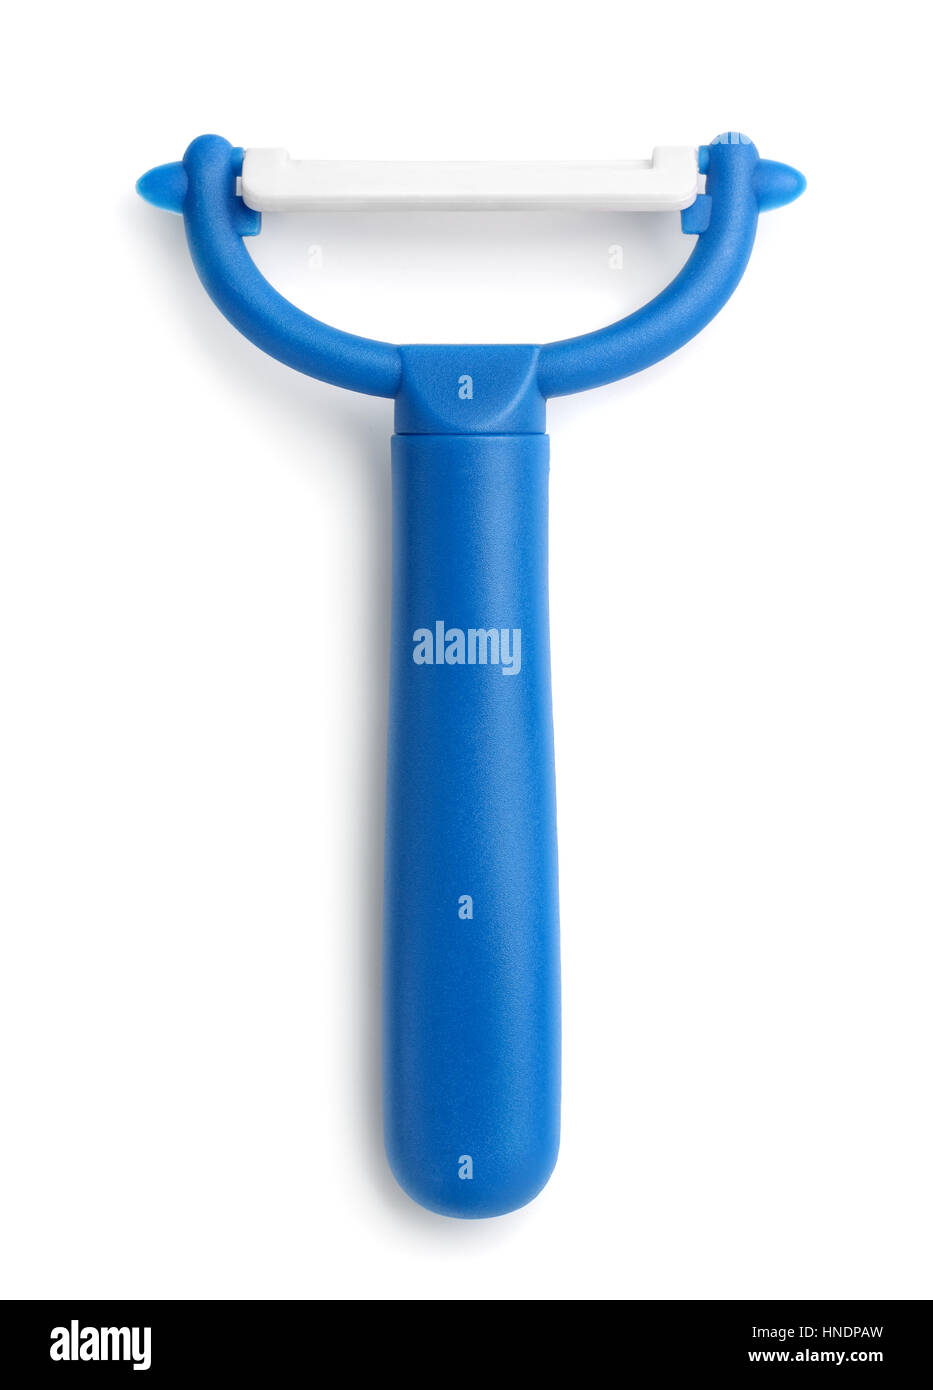 https://c8.alamy.com/comp/HNDPAW/top-view-of-blue-plastic-vegetable-peeler-isolated-on-white-HNDPAW.jpg